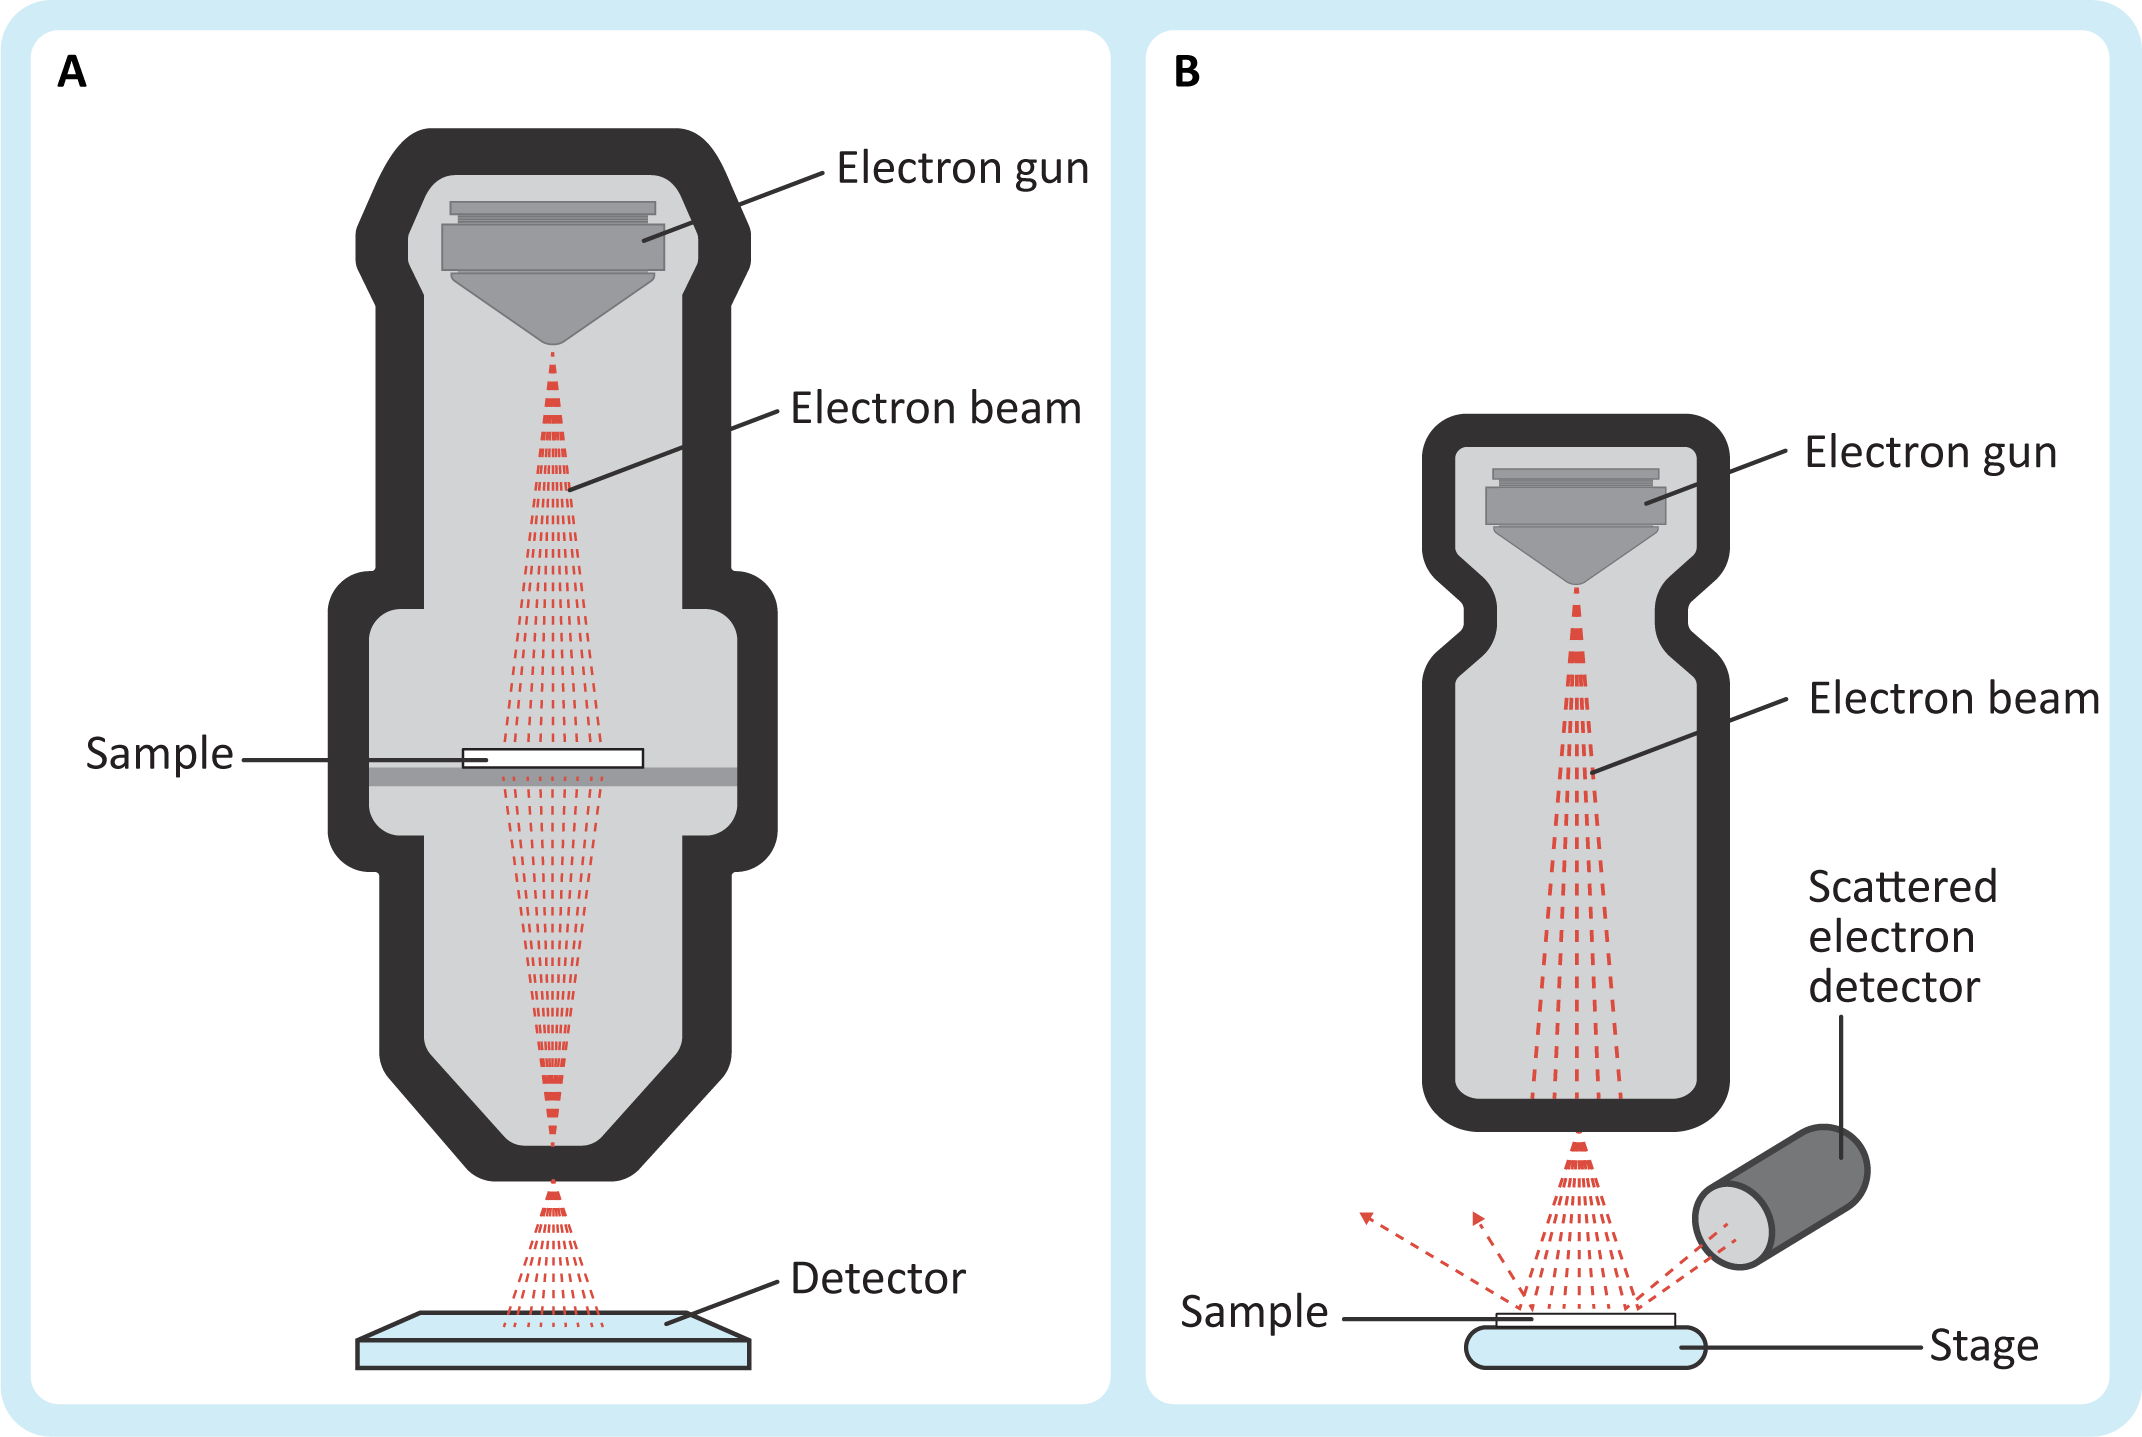 Schematics of transmission and scanning electron microscopes including how the electrons interact with the sample.